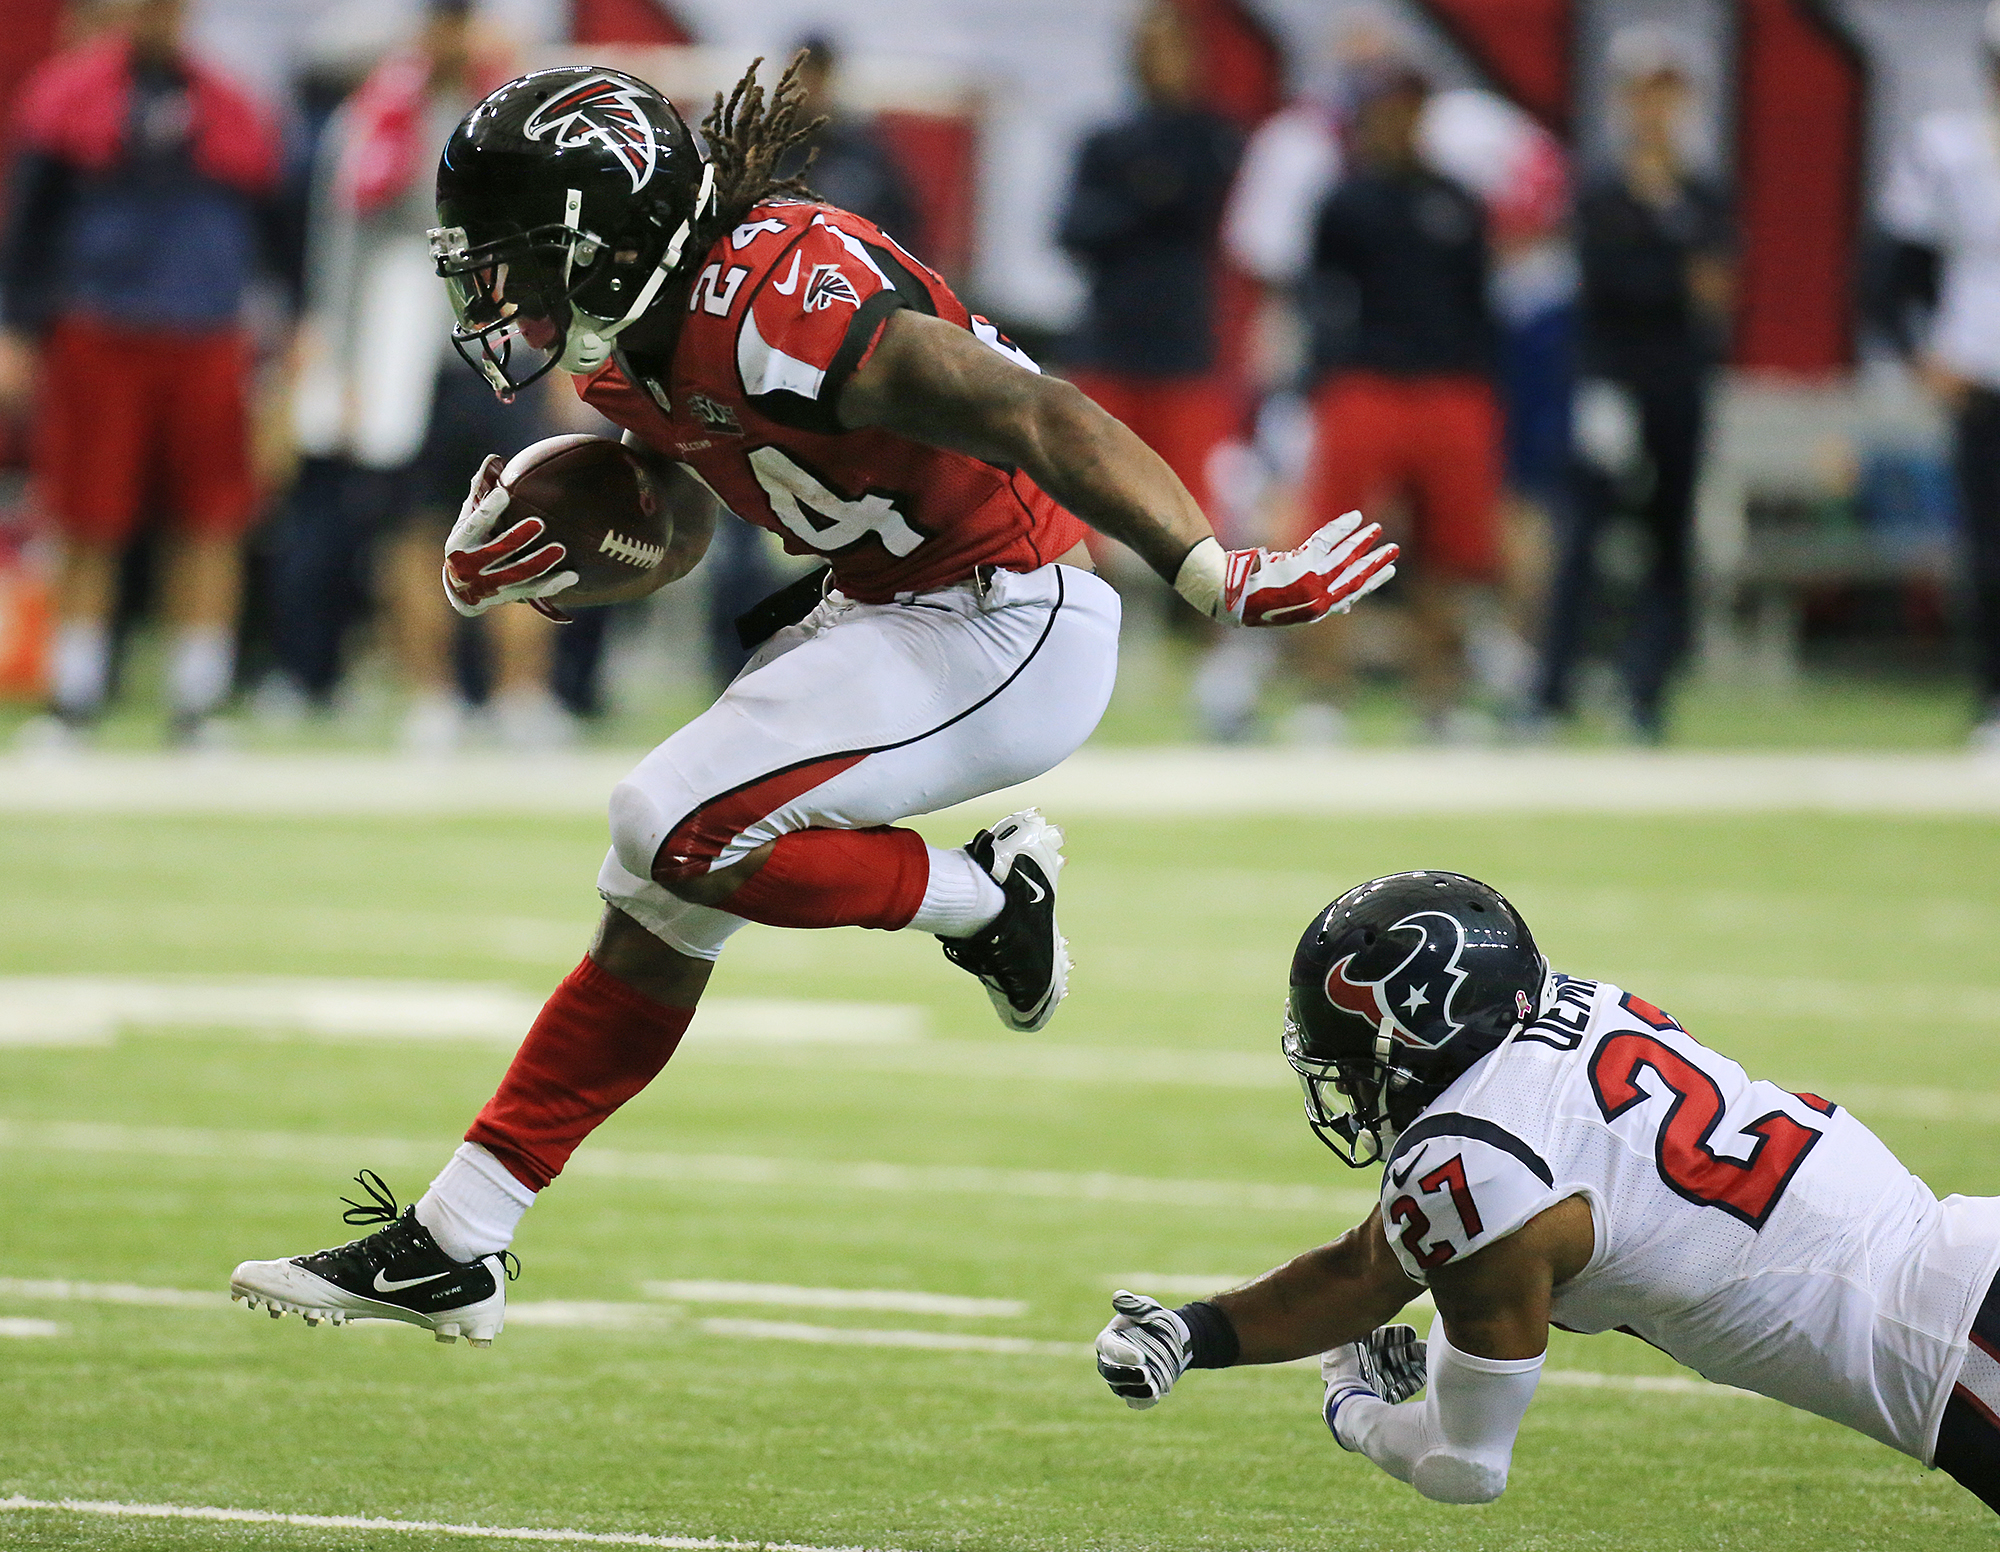 Schultz: Falcons answer some questions with win, but Desmond